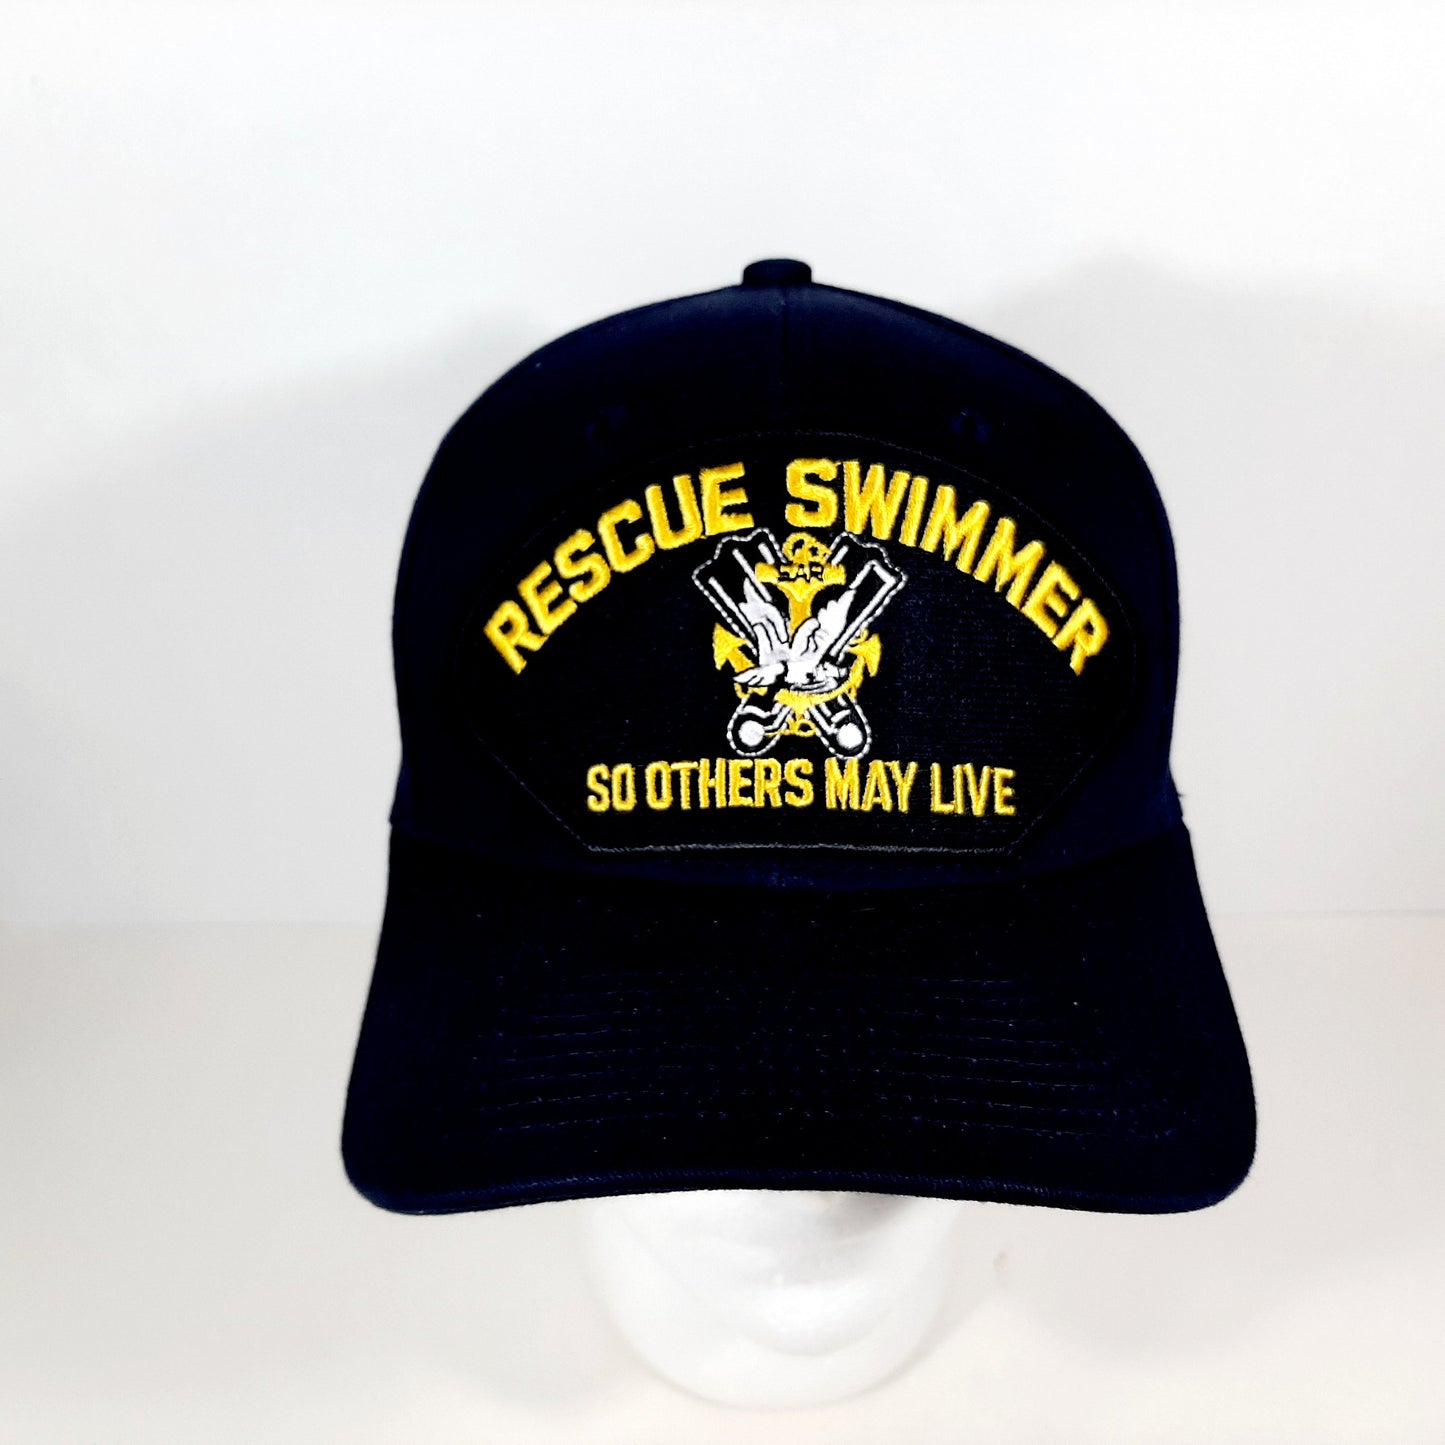 US Navy Rescue Swimmer So Others May Live Mens Embroidered Patch Hat Cap Blue